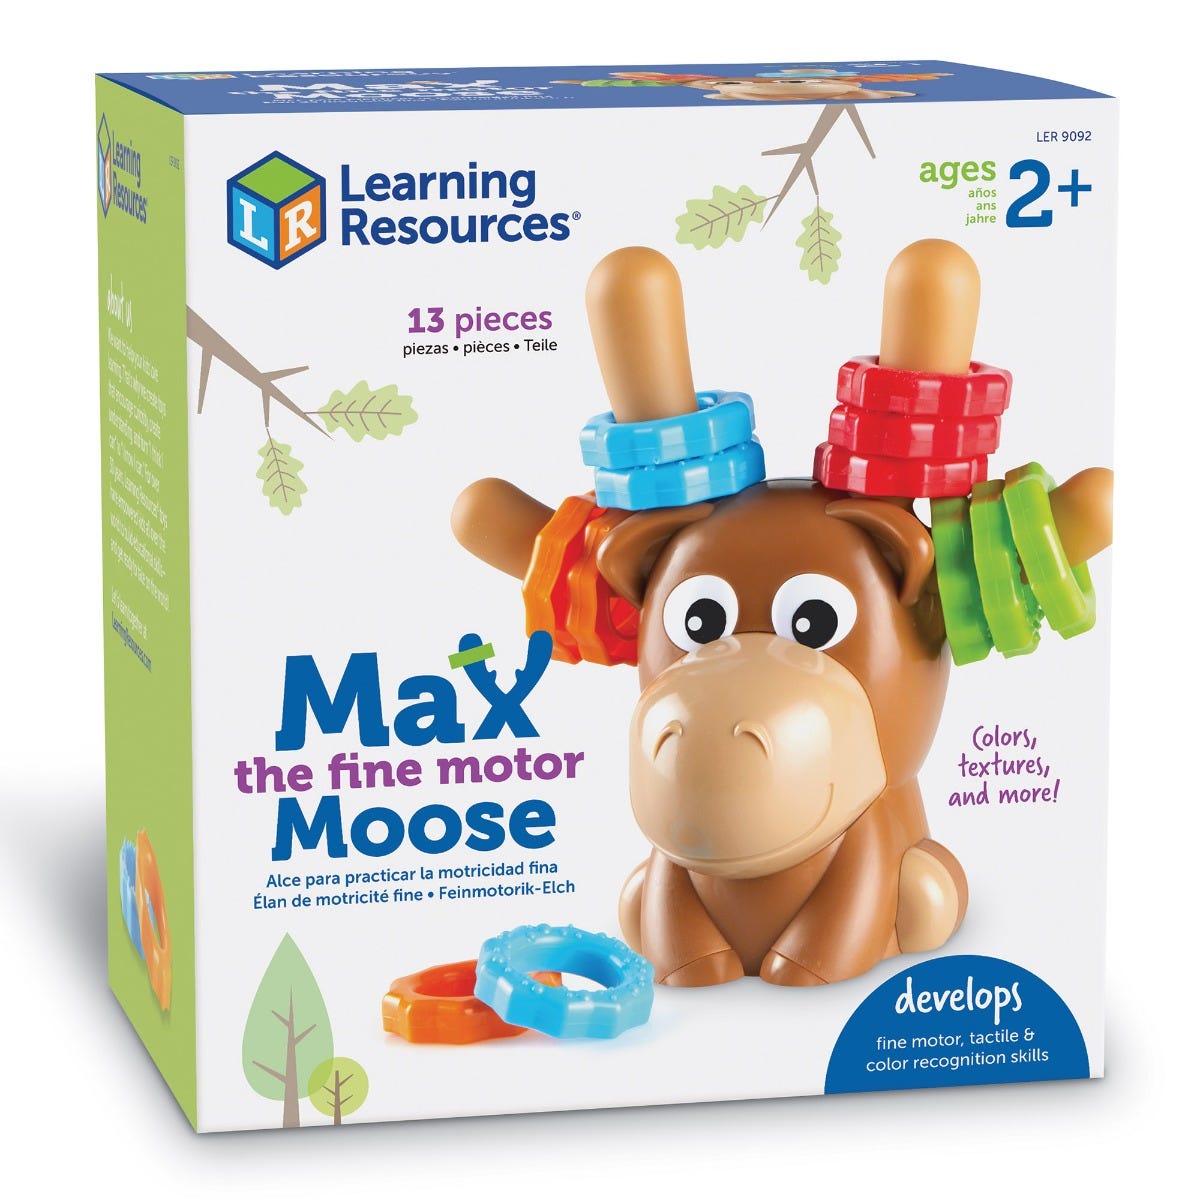 Learning Resources Max the Fine Motor Moose (LER 9092)